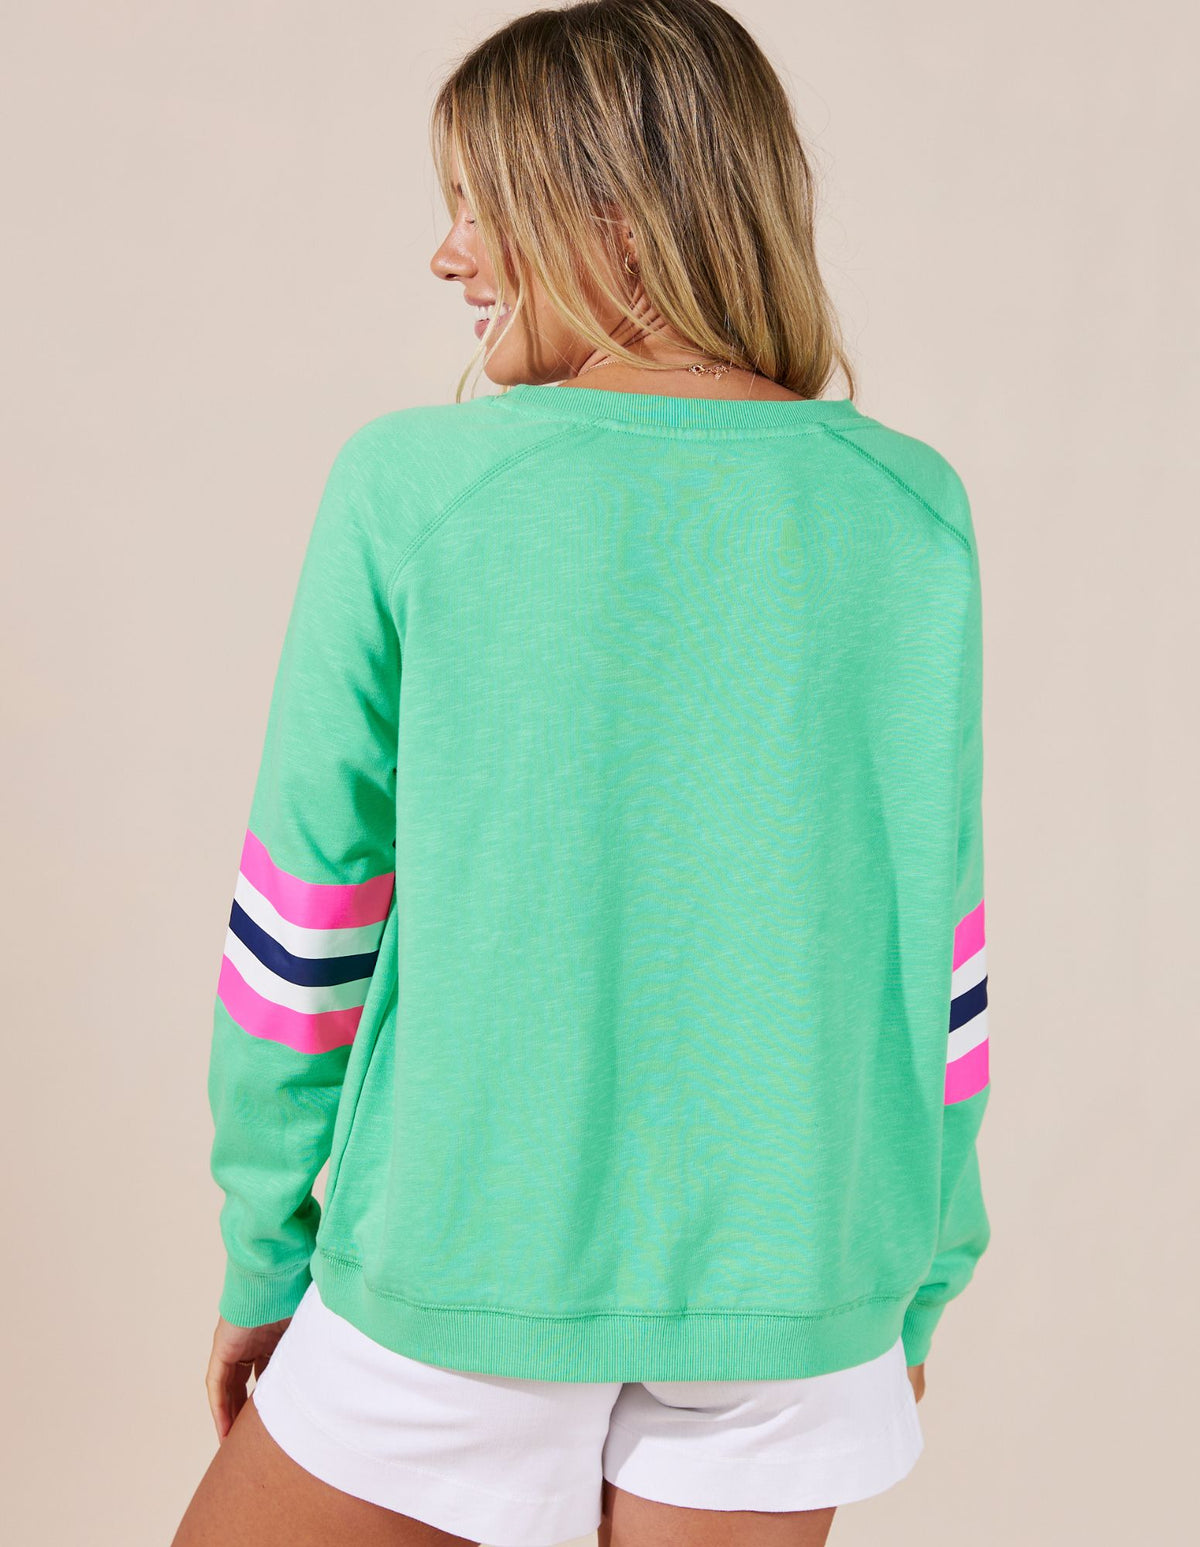 Holiday Sweater - Green/Pink Star - Jovie The Label